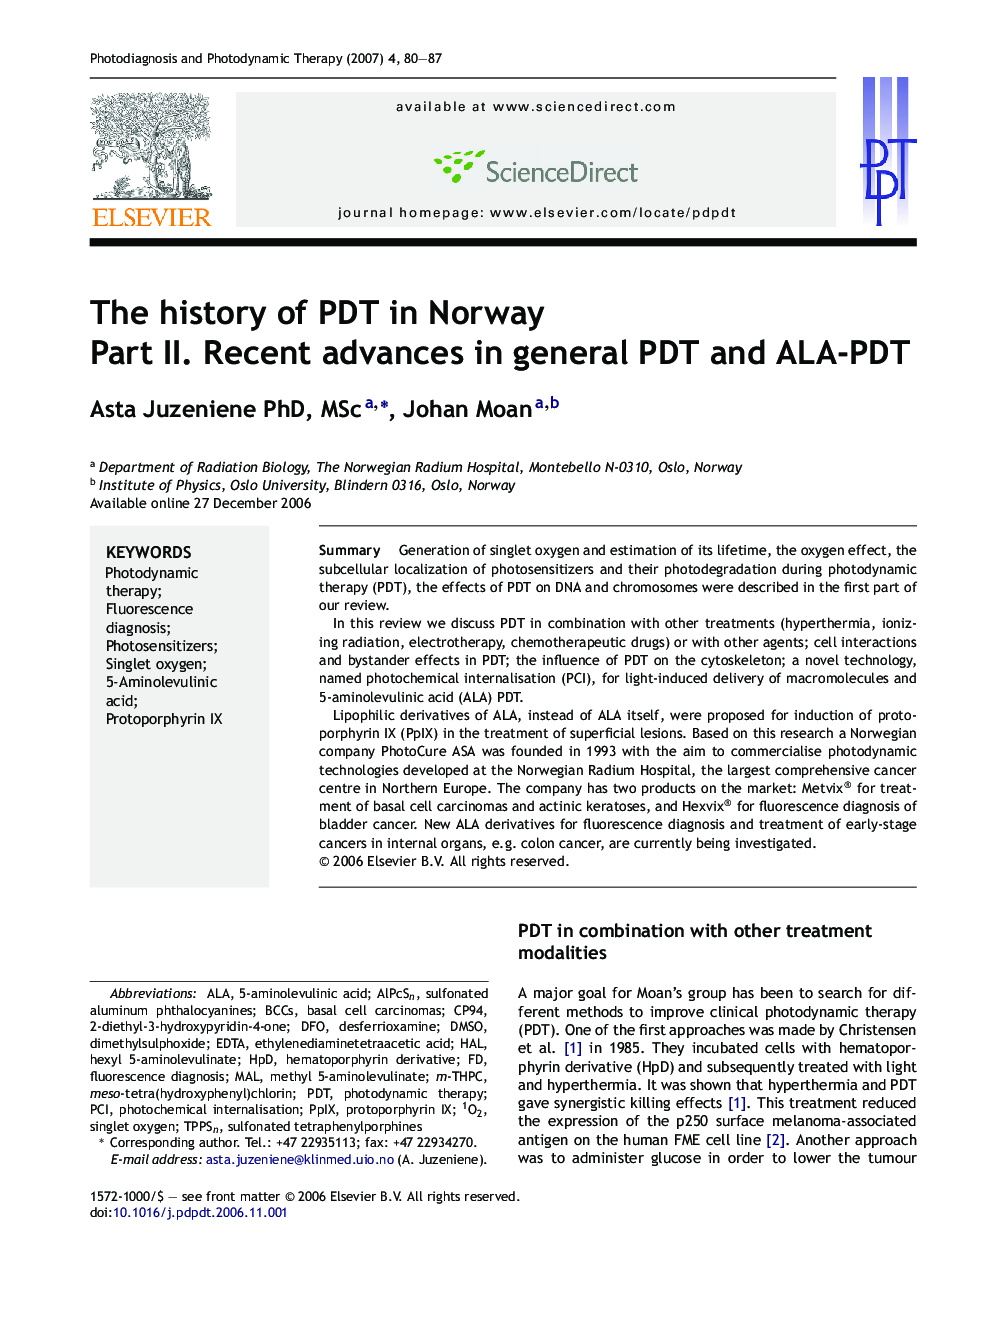 The history of PDT in Norway: Part II. Recent advances in general PDT and ALA-PDT